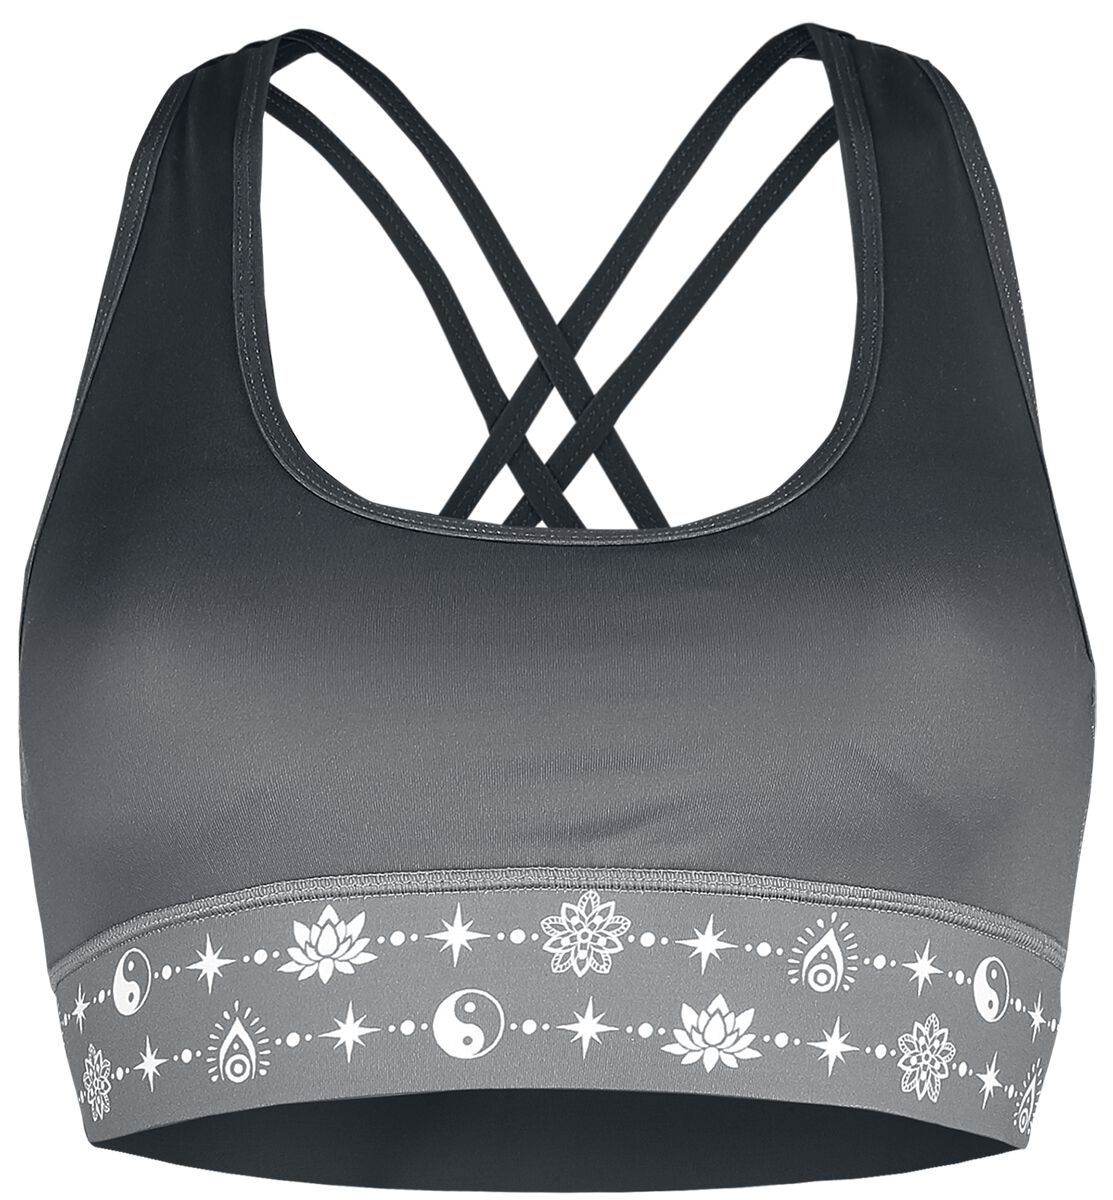 Sport and Yoga - Grey Bralette with Print and Crossed Straps at the Back, EMP Special Collection Bustier